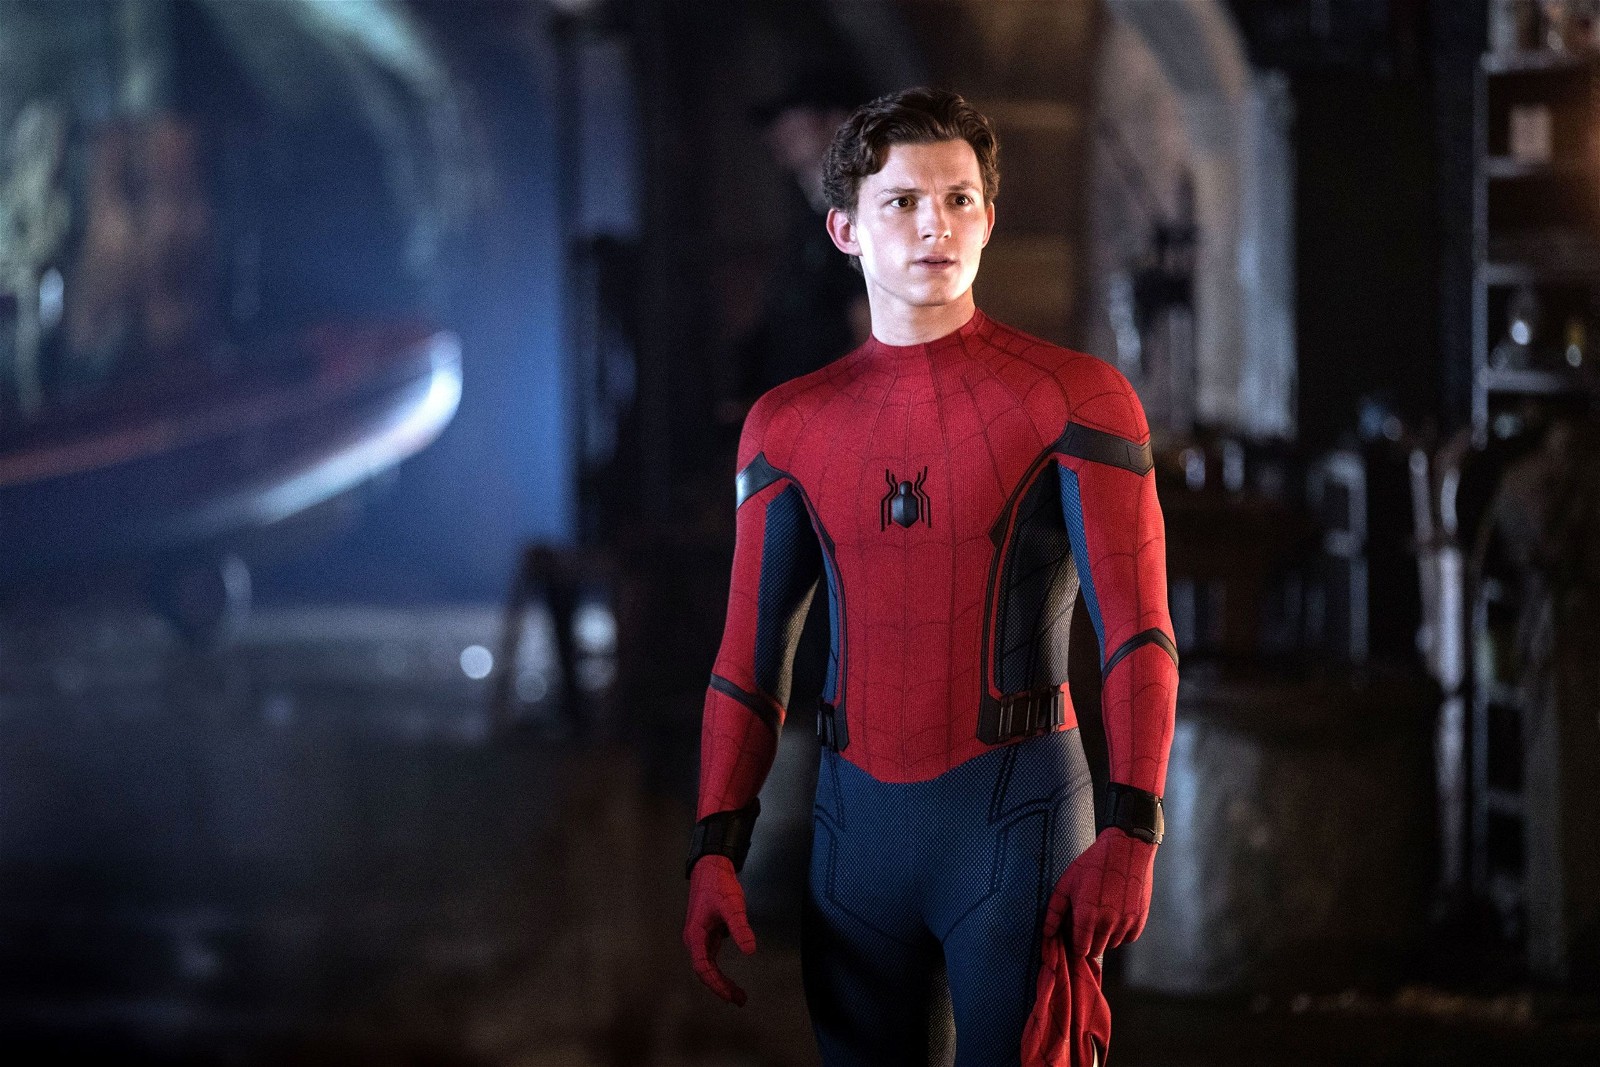 Tom Holland as Spider-Man in the MCU.